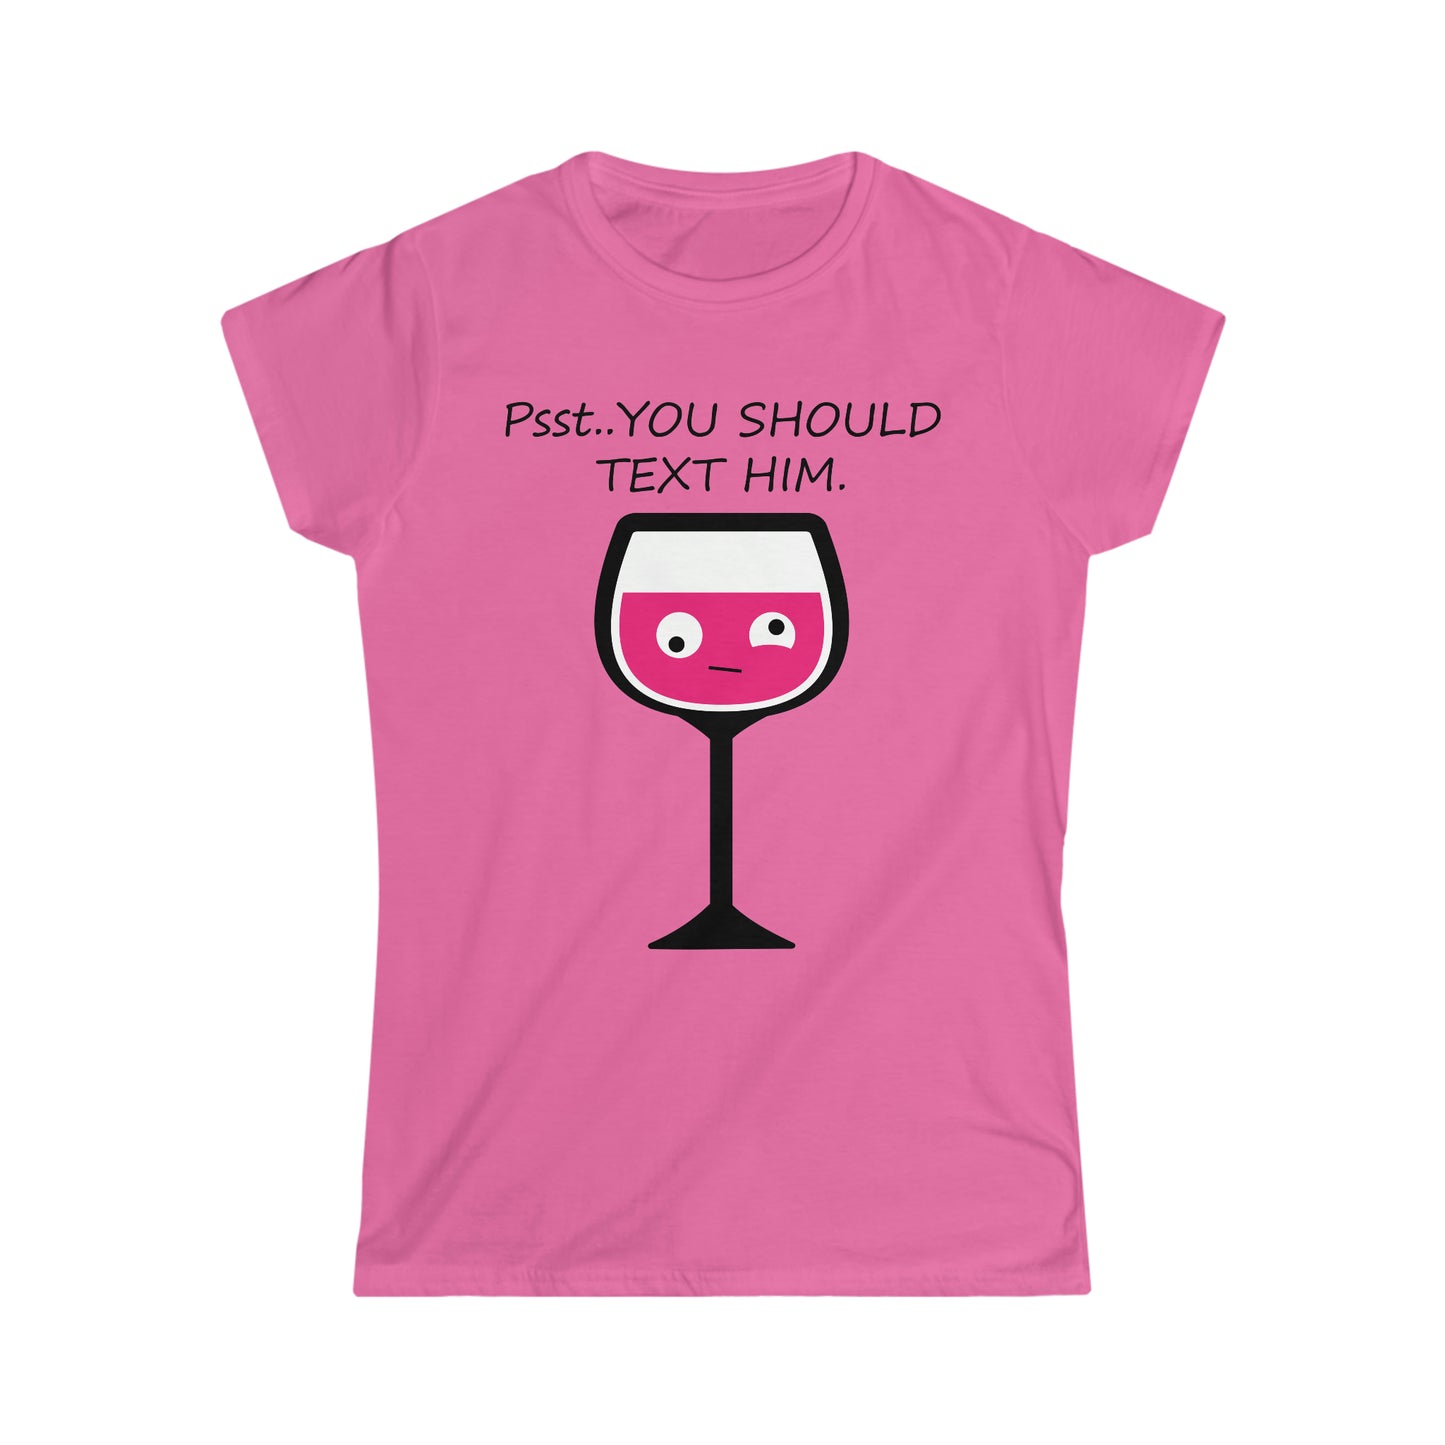 You should Text Him - Women's Softstyle Tee